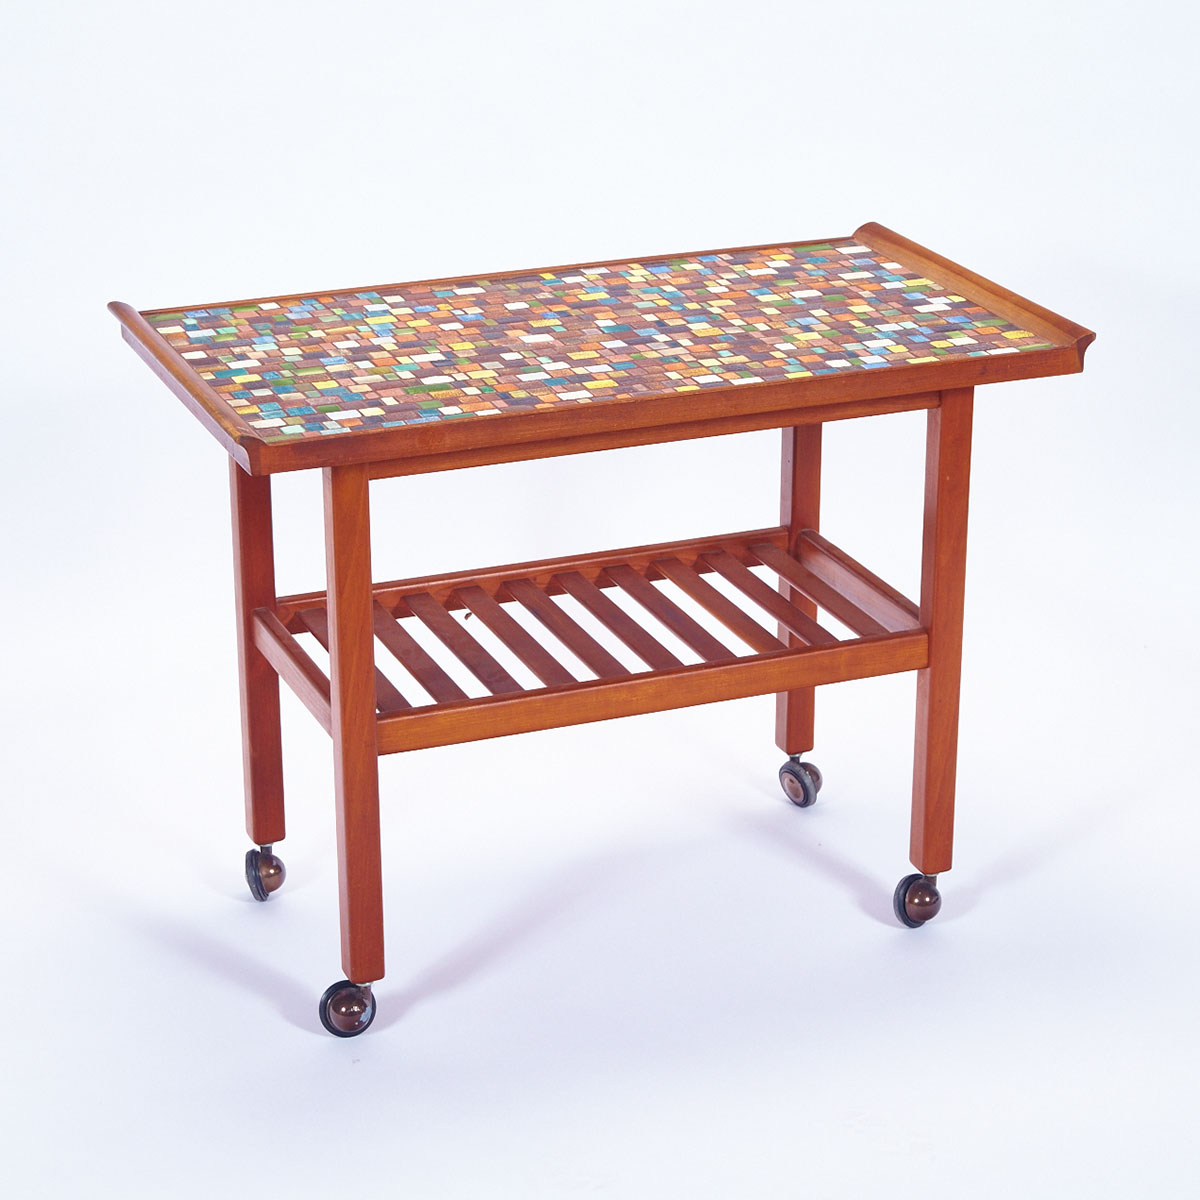 Brooklin Pottery ‘Mosaic’ Tile Topped Table, Theo, Susan and Ben Harlander, 1960s